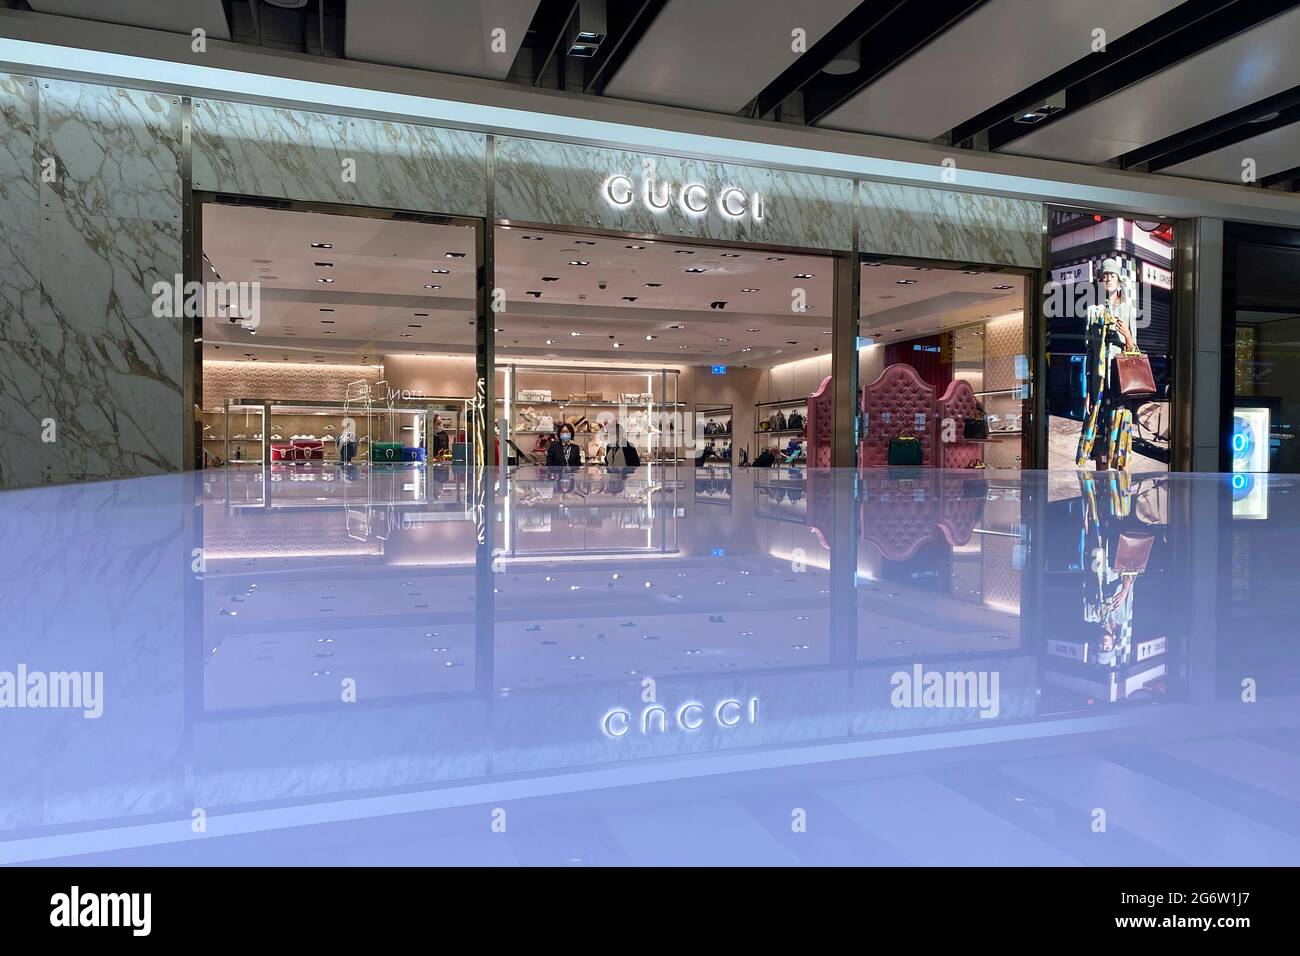 Gucci Store London High Resolution Stock Photography Images - Alamy